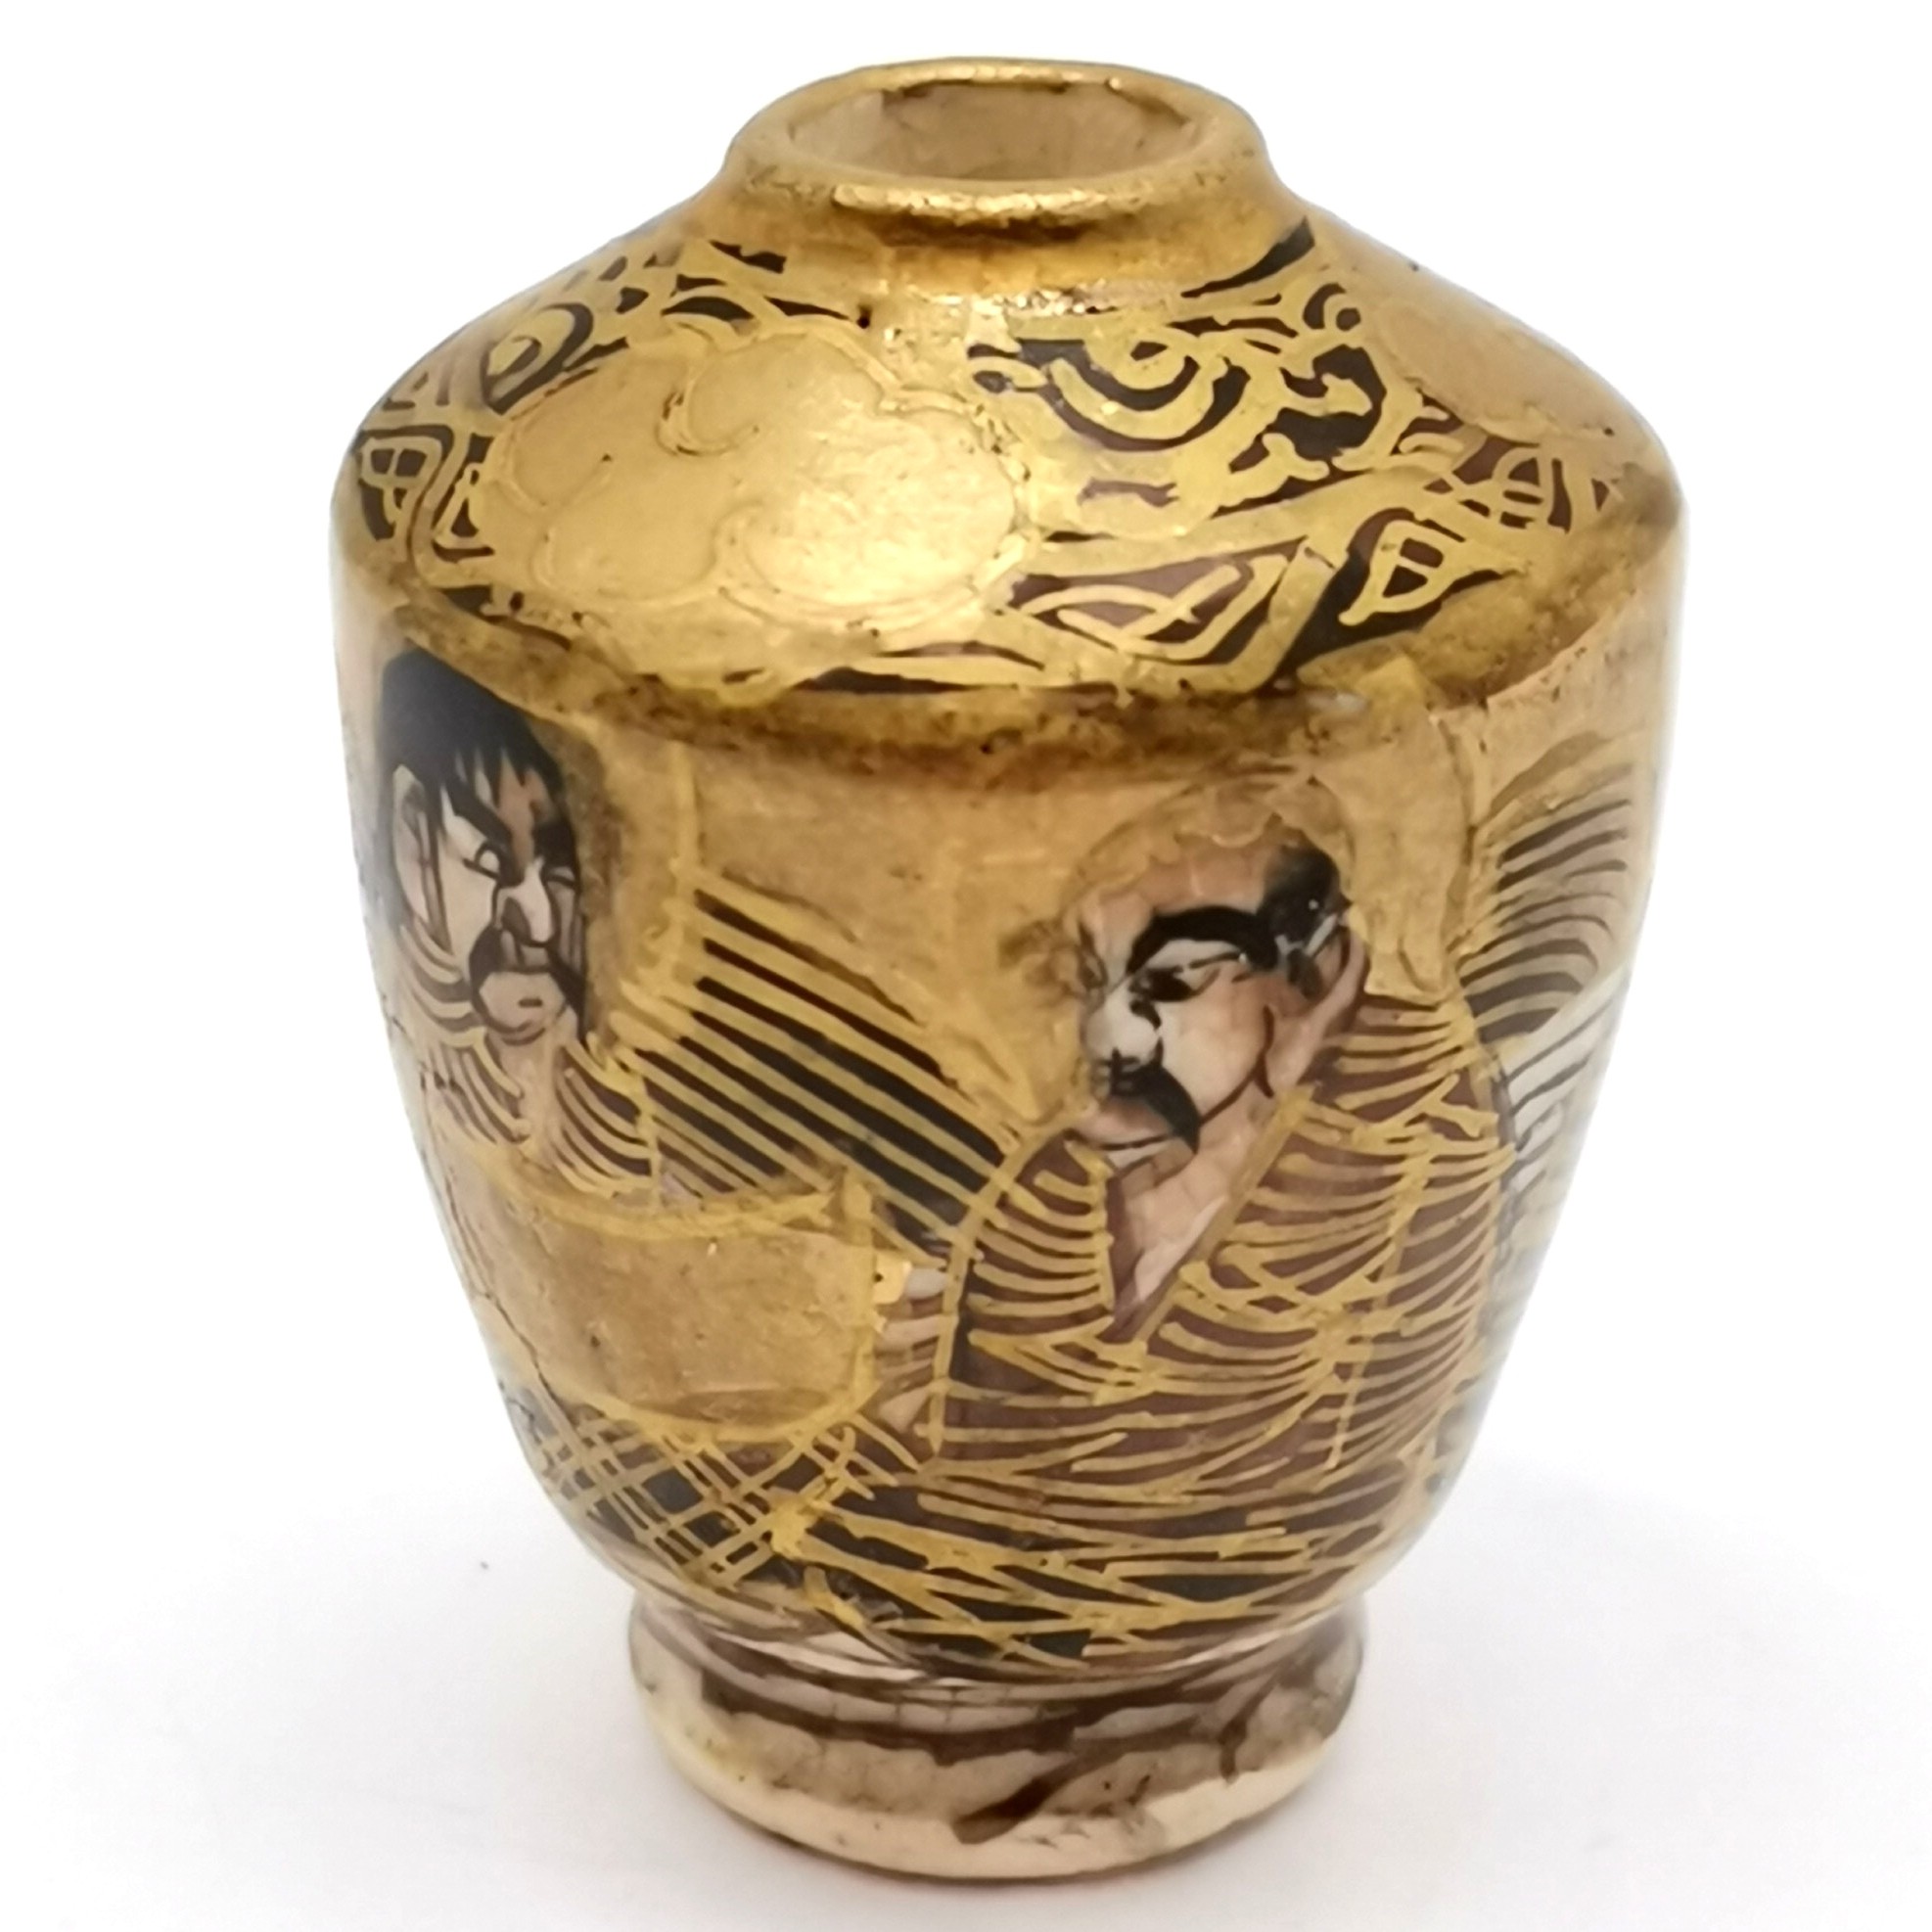 Miniature antique Oriental Japanese satsuma vase with 5 figure detail and character marks to - Image 2 of 4